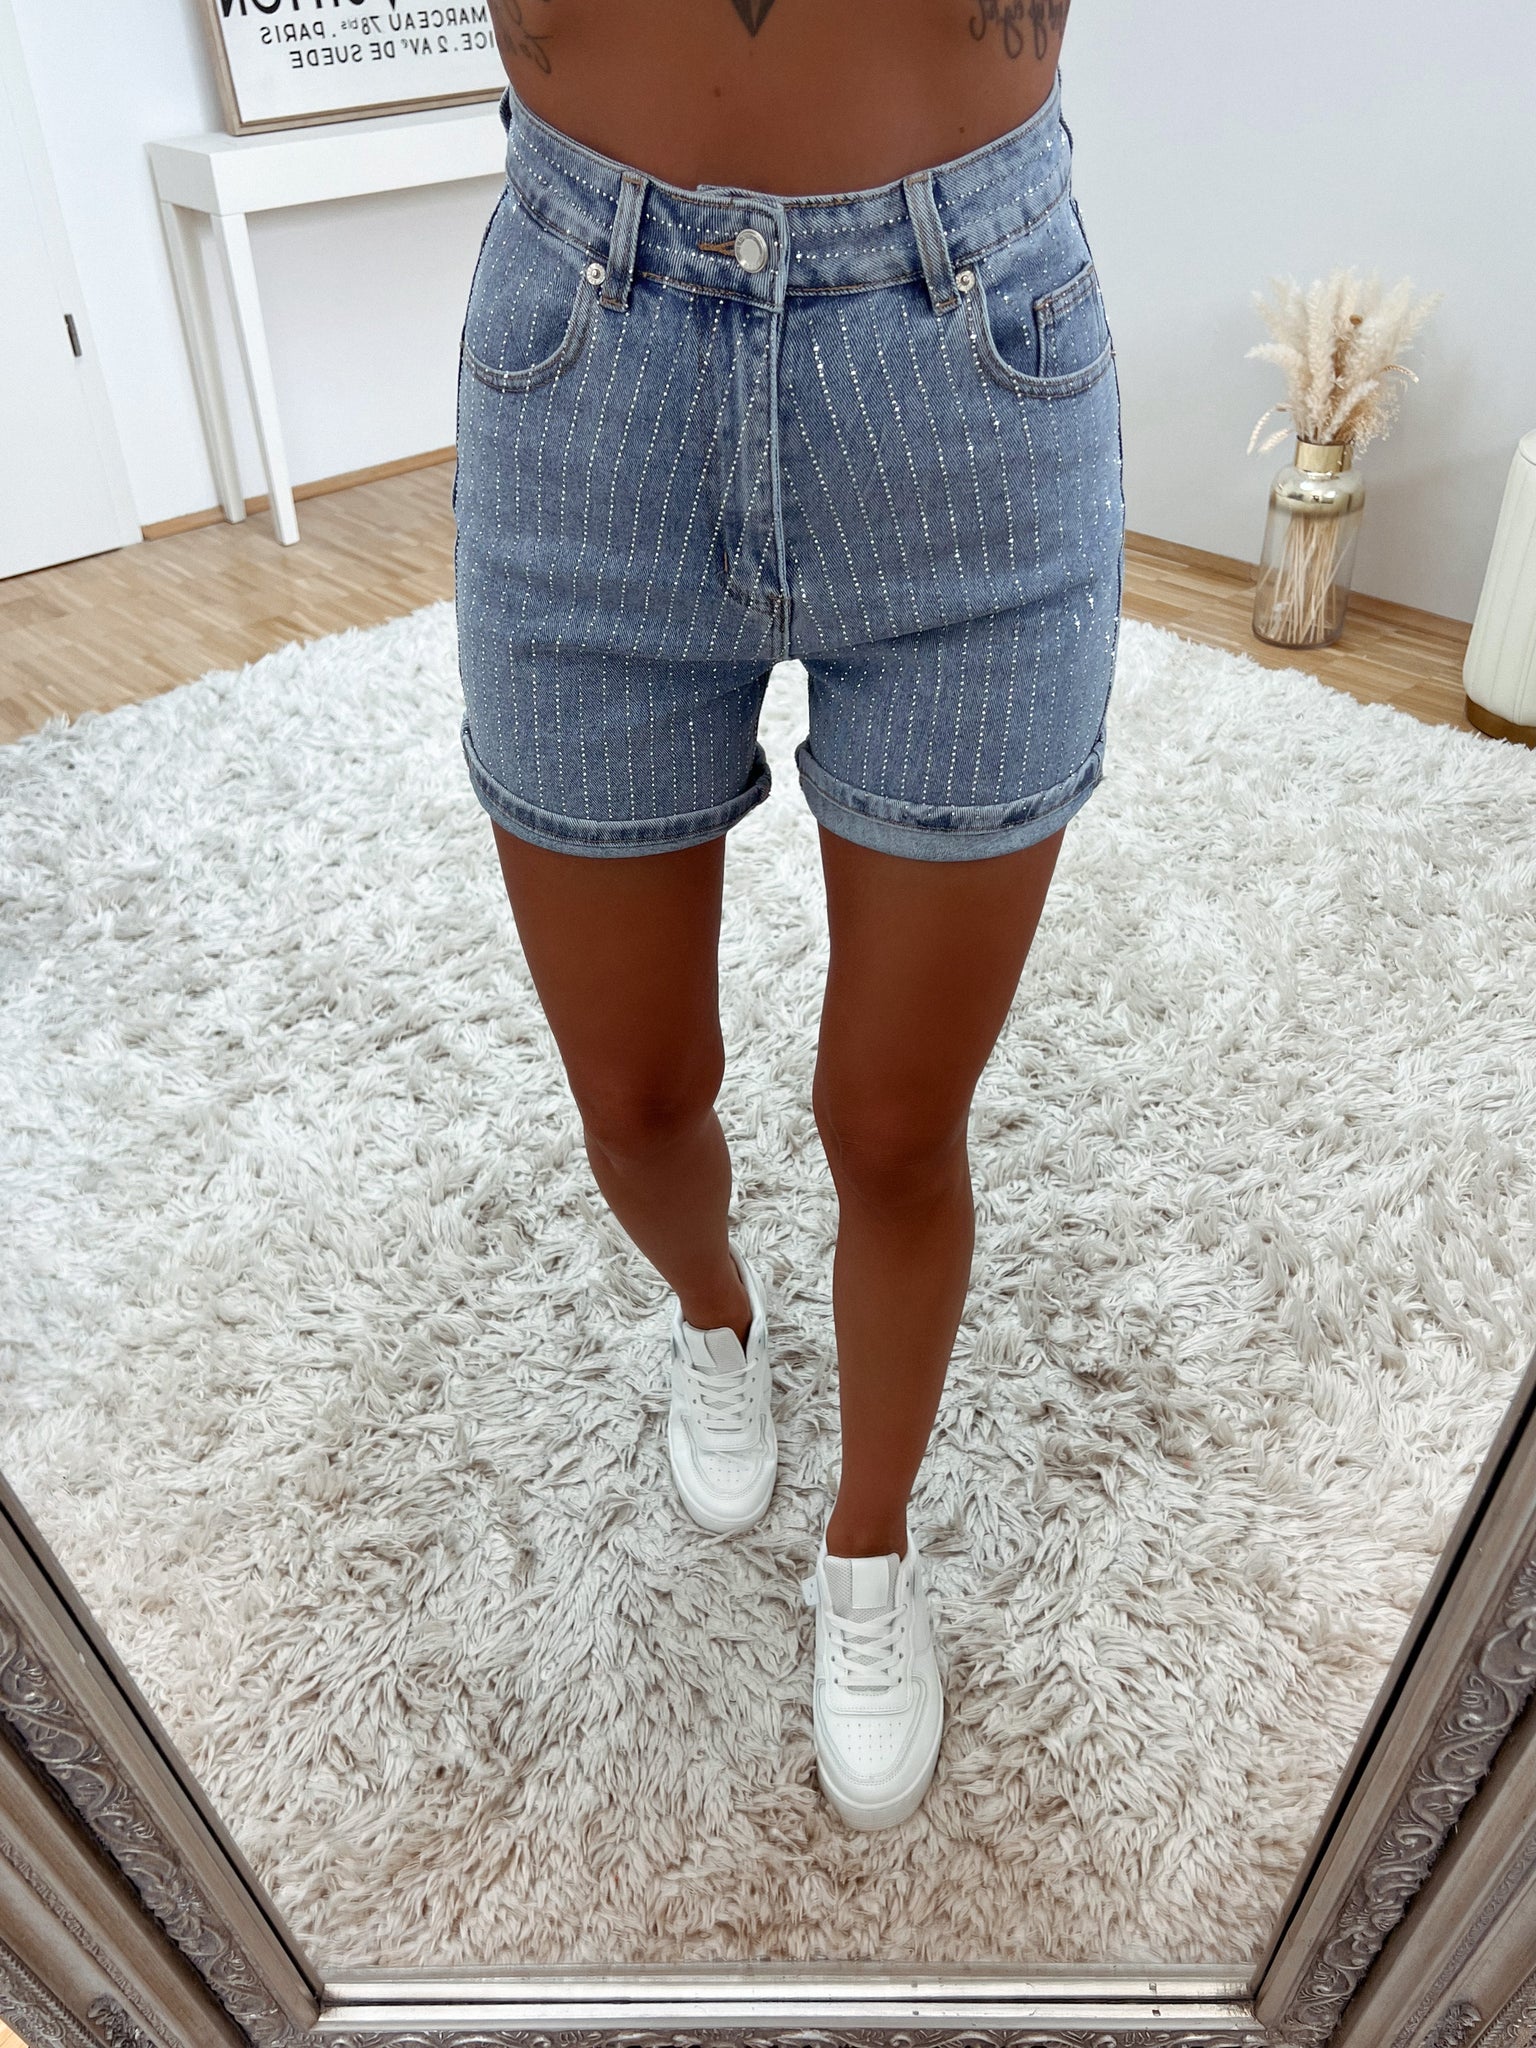 jeans shorts 'glamour'